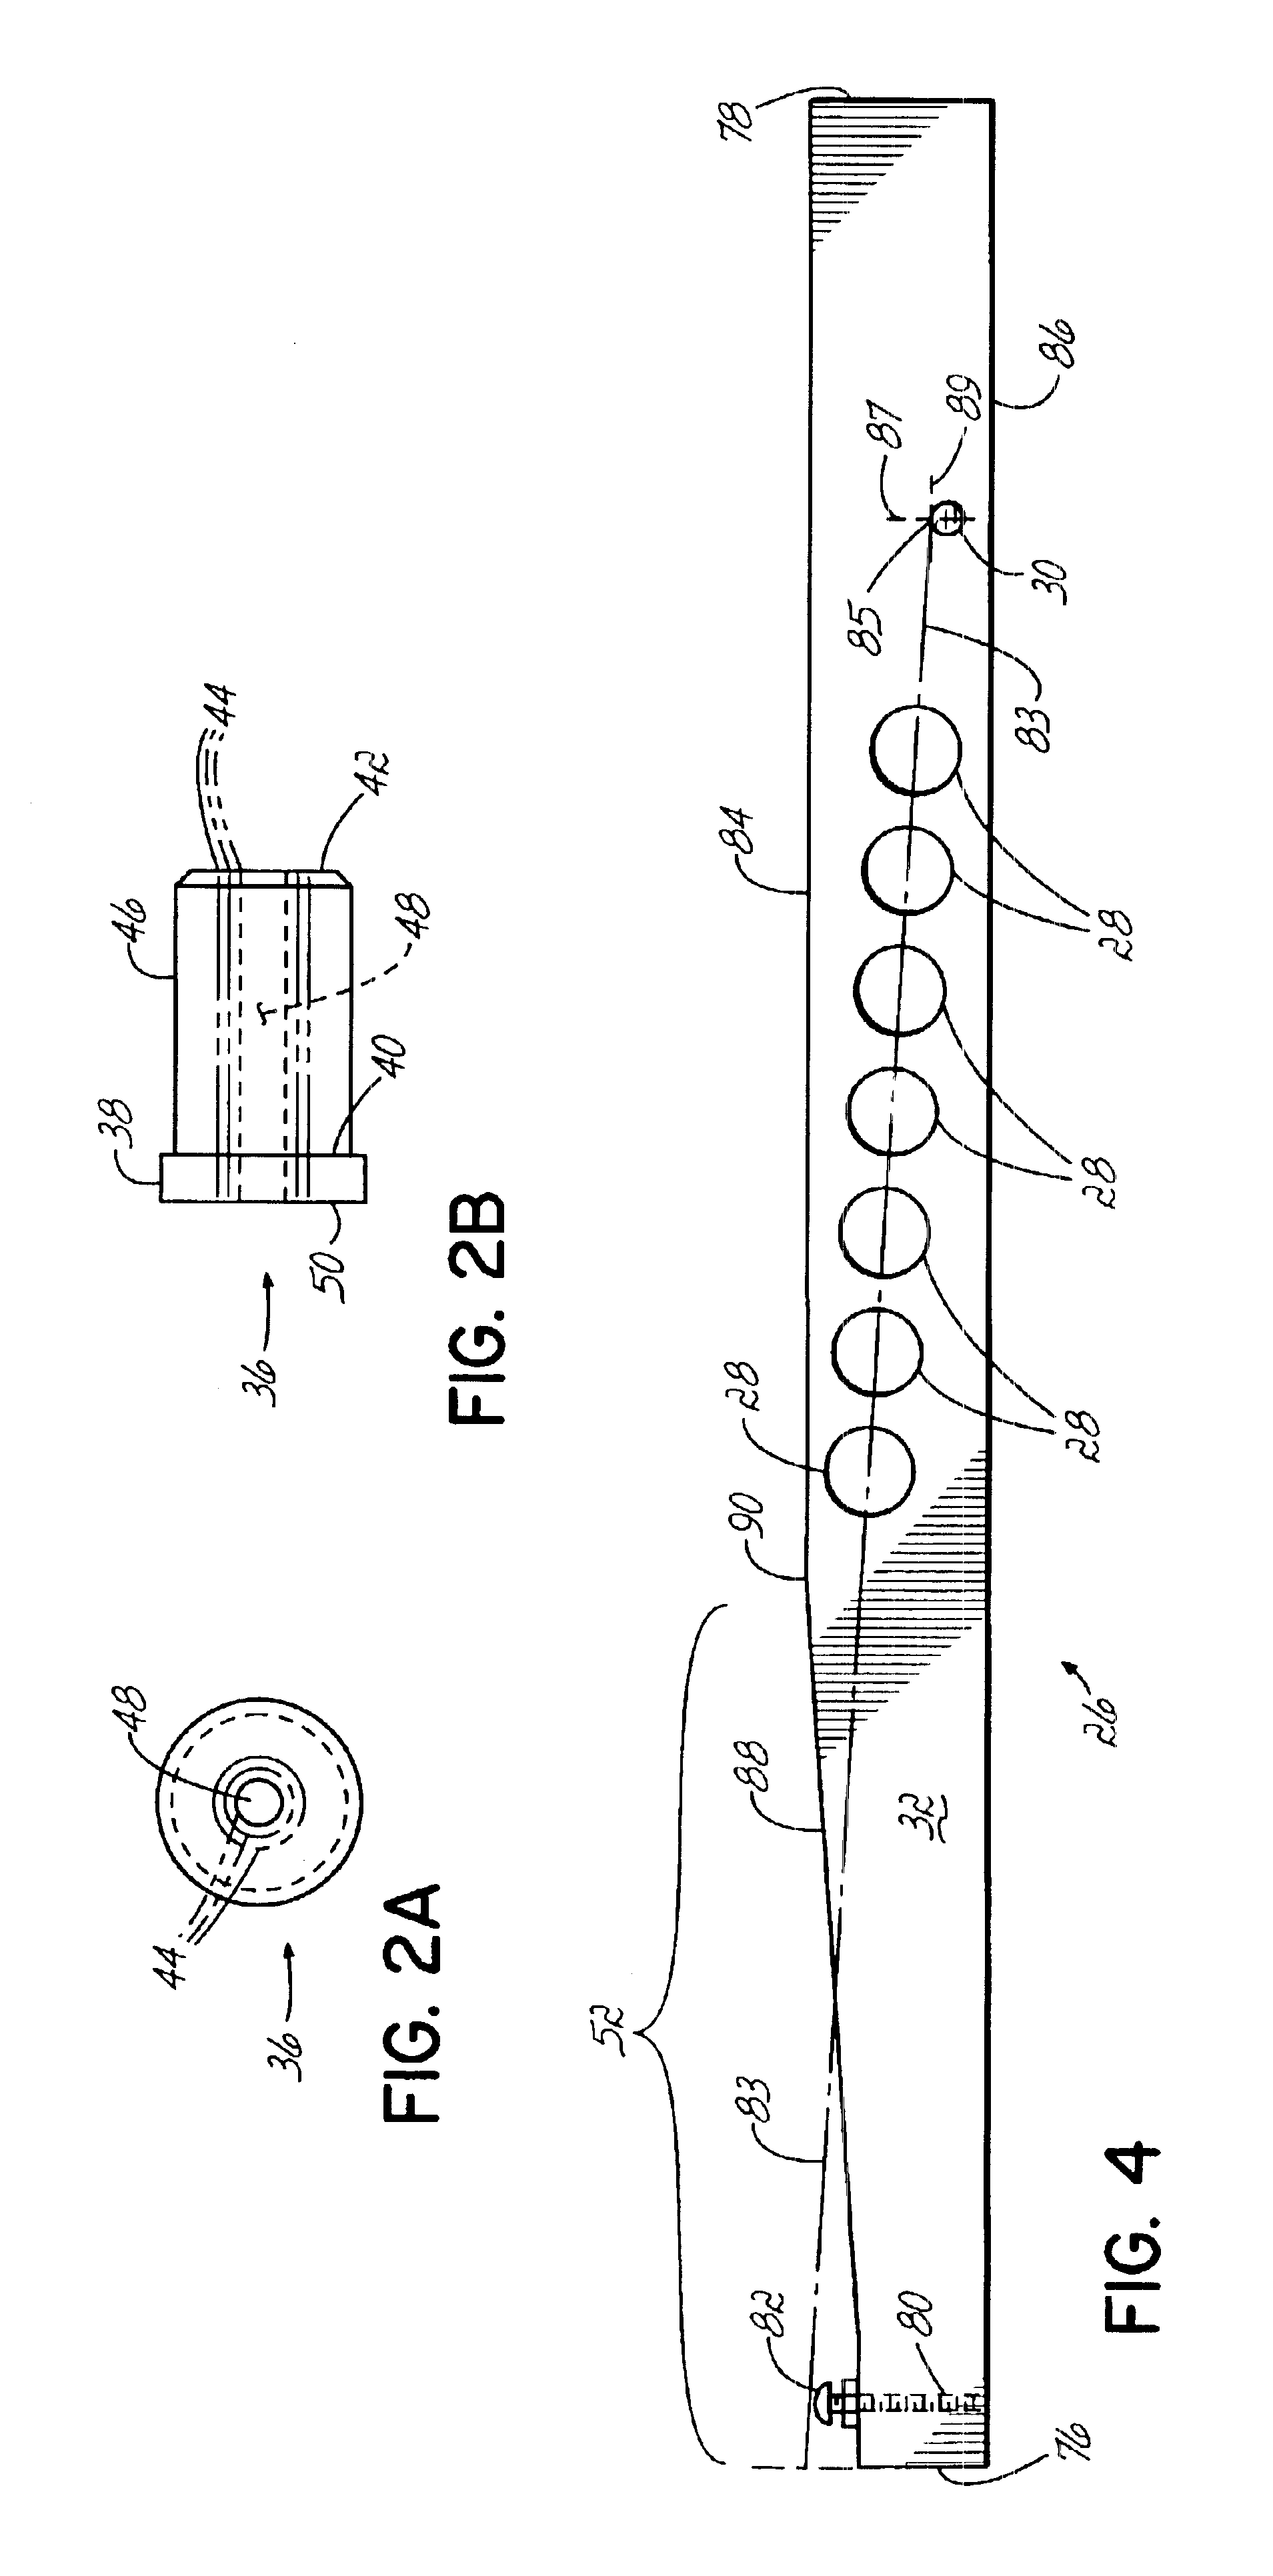 System for spacing flutes on a workpiece